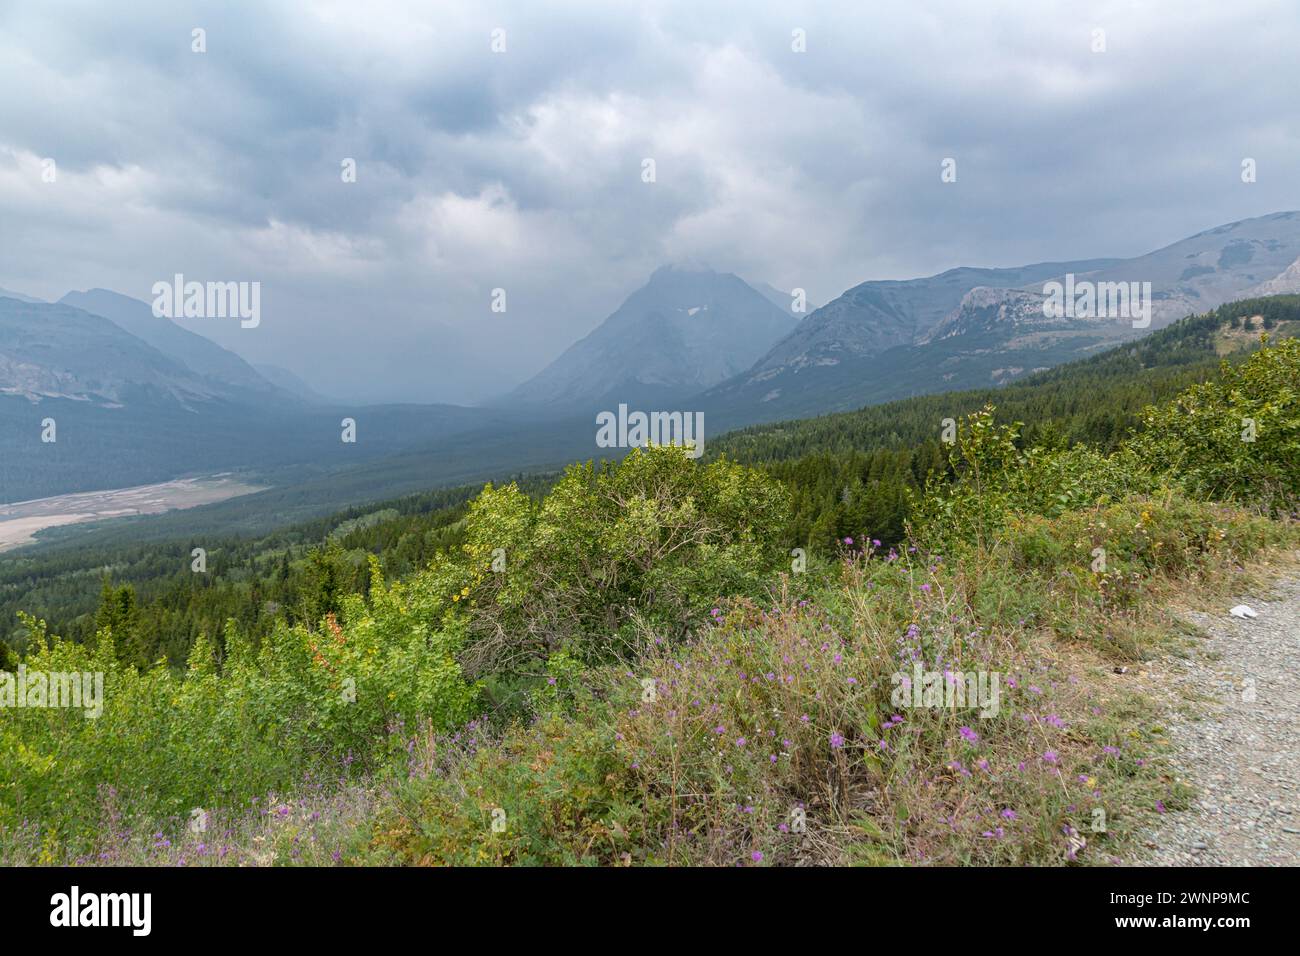 View of Saint Mary Lake in Glacier National Pak from an overlook in St. Mary, Montana on a smokey and cloudy day Stock Photo